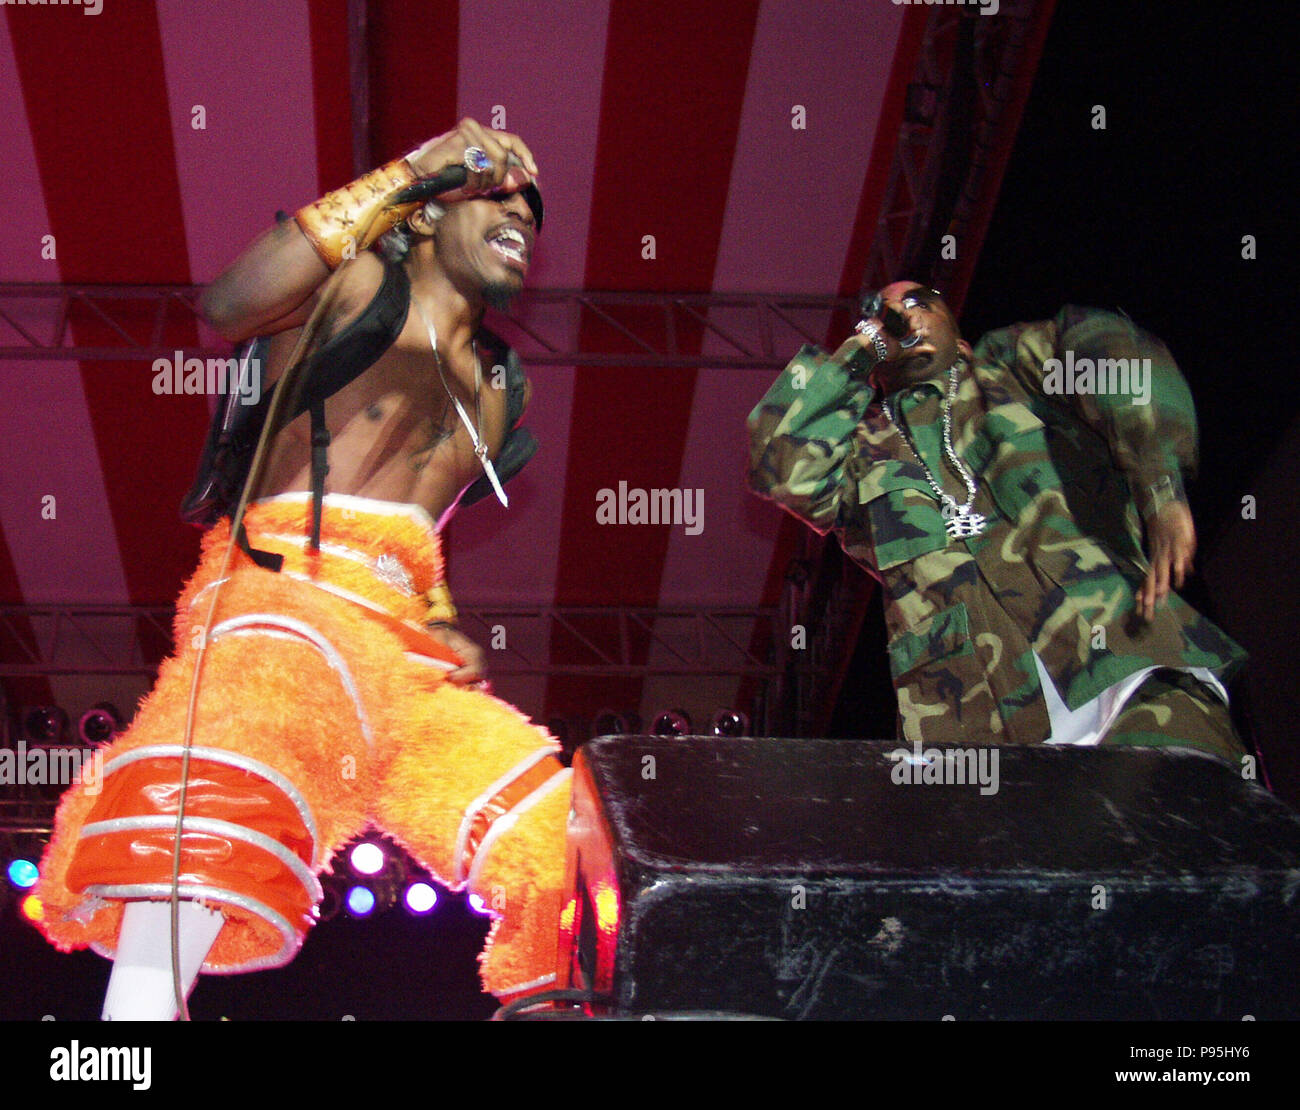 COLUMBIA, SC - April 6:  Andre Benjamin (aka Andre 3000) and Antwan "Big Boi" Patton of Outkast perform at 3 Rivers Music Festival in Columbia, South Carolina on April 6, 2002. CREDIT: Chris McKay / MediaPunch Stock Photo